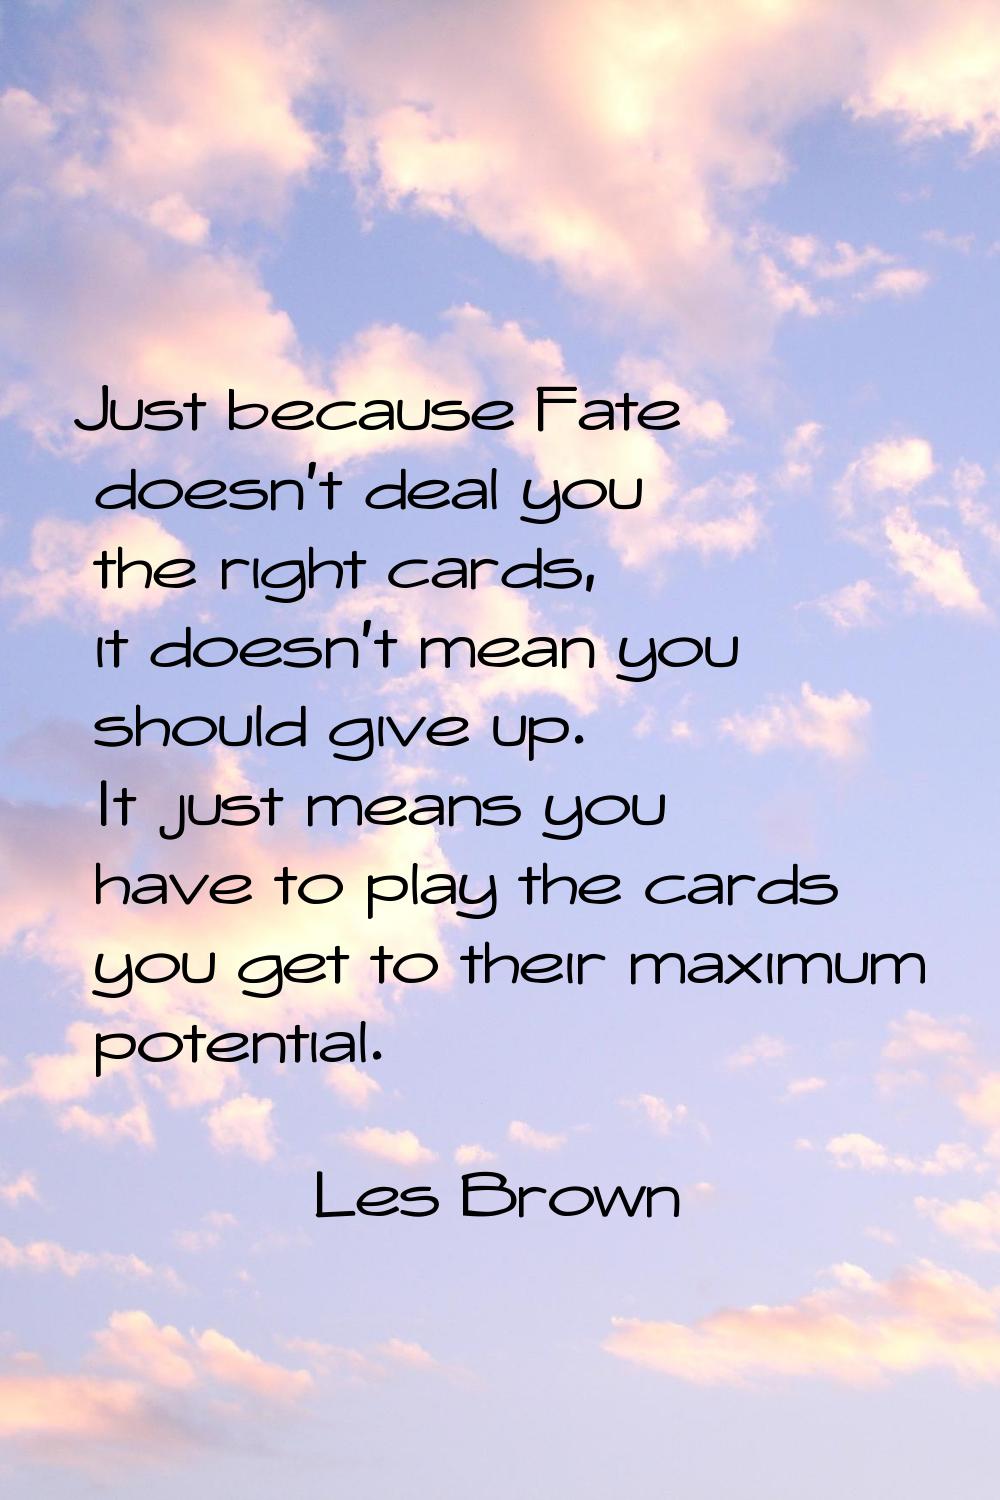 Just because Fate doesn't deal you the right cards, it doesn't mean you should give up. It just mea